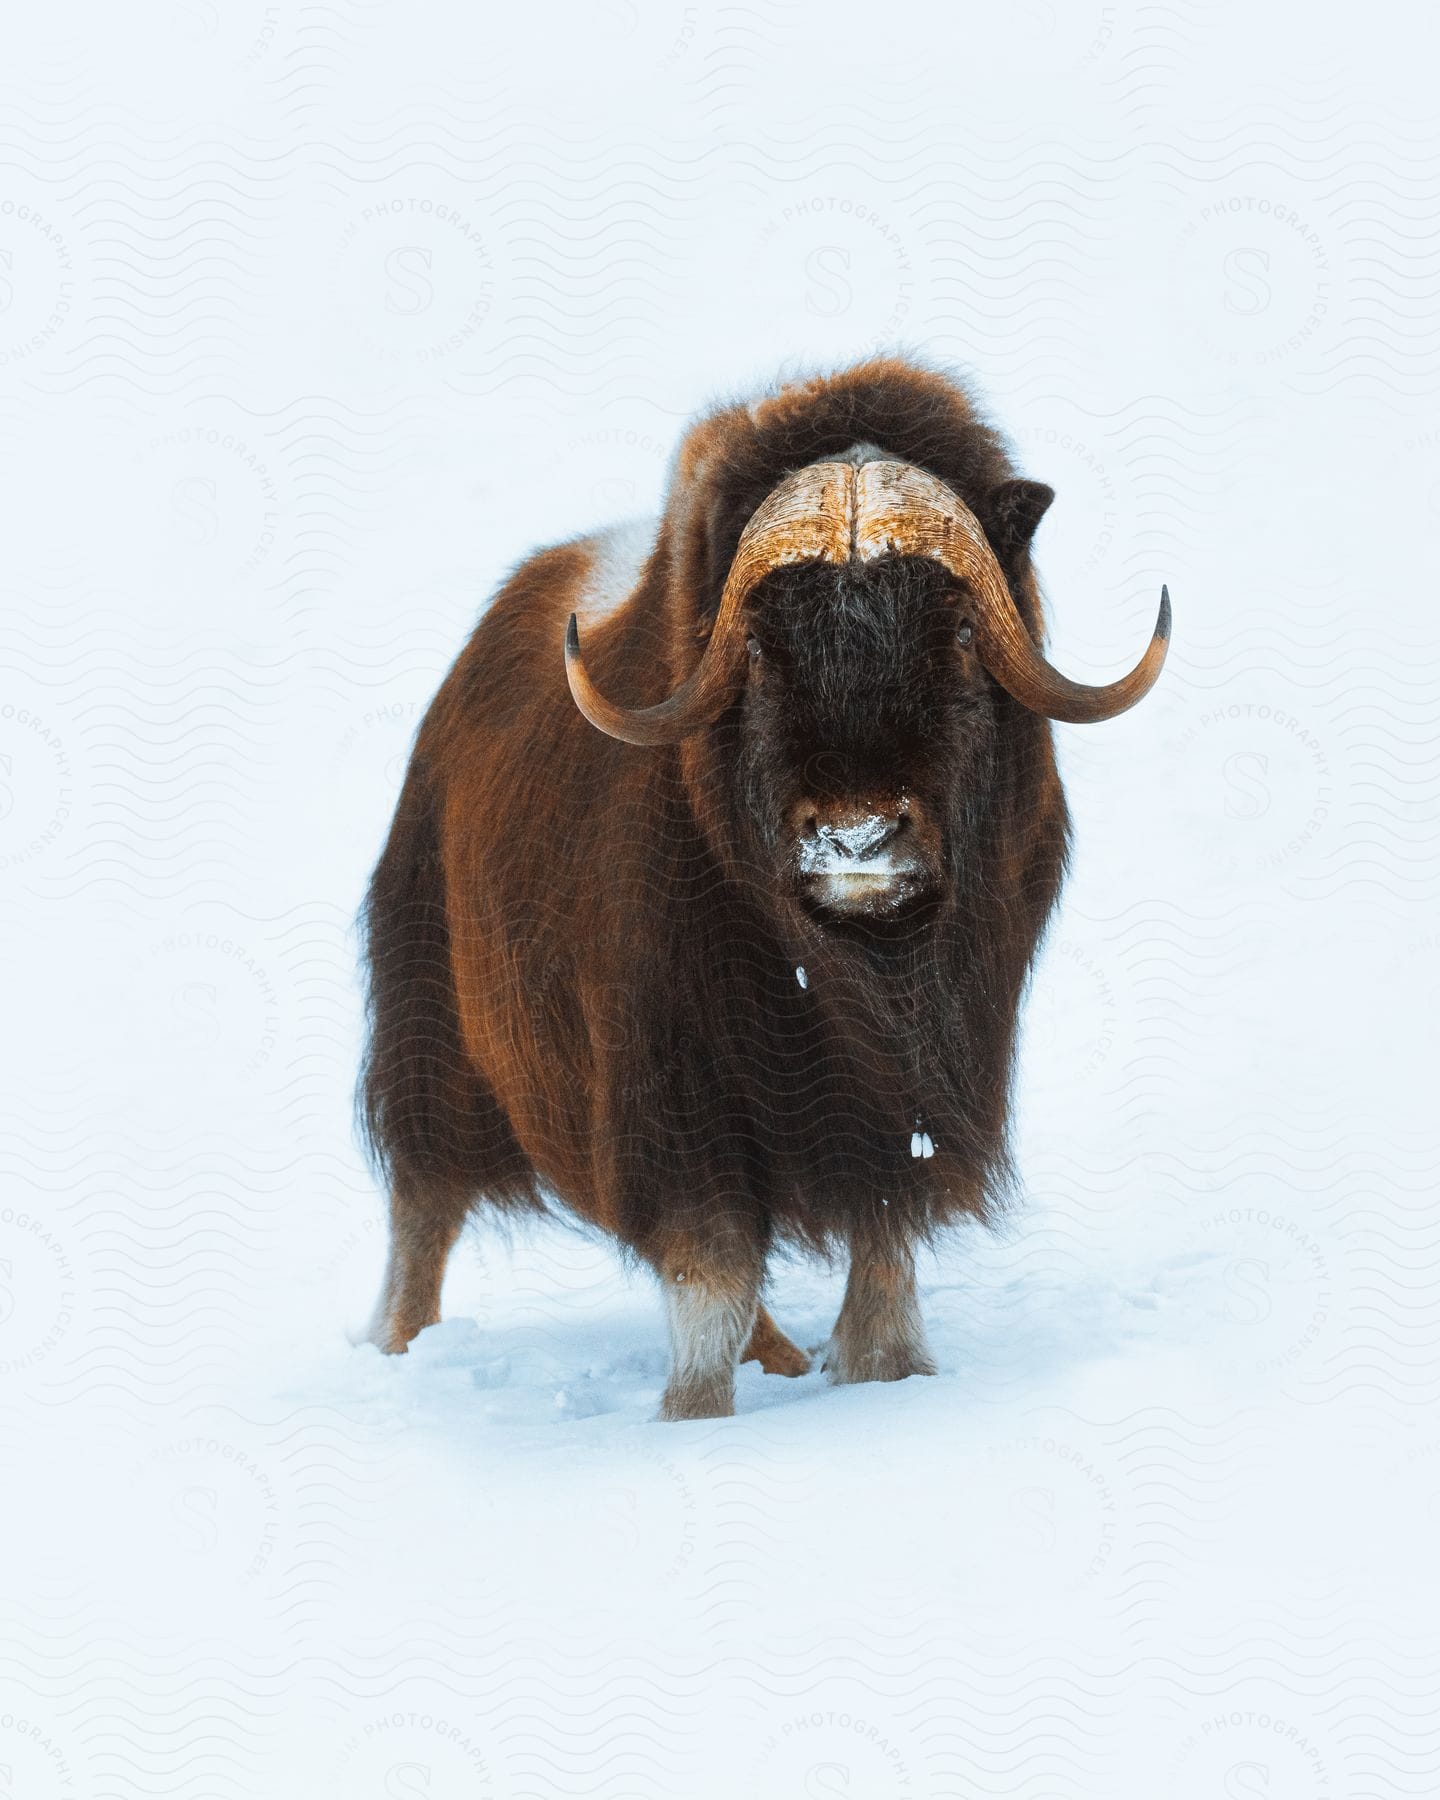 A musk ox stands in the snow looking ahead